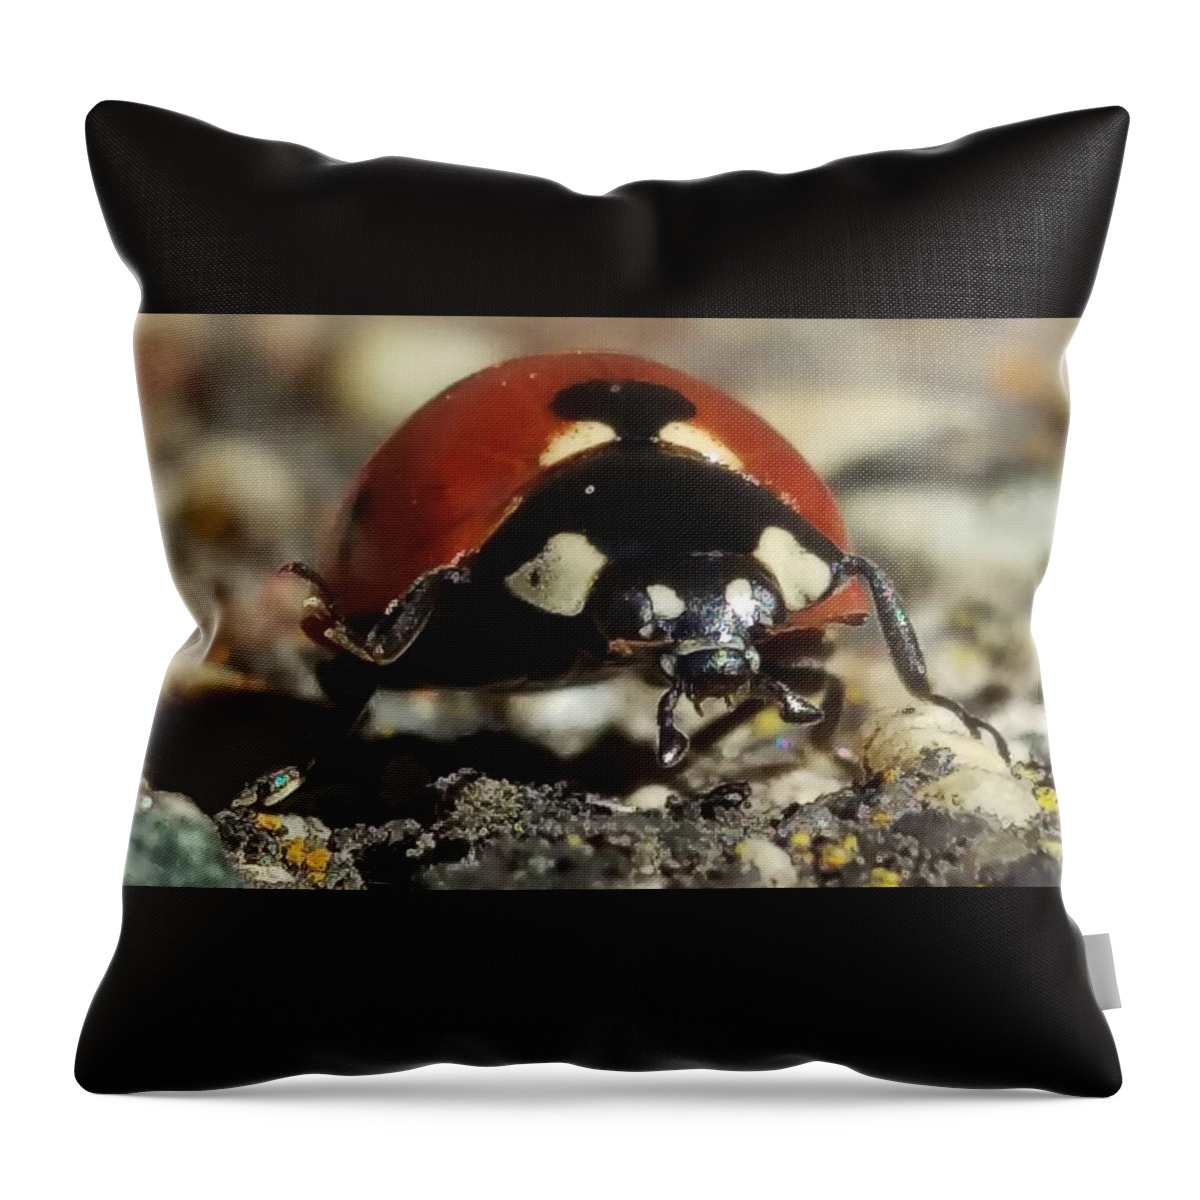 Ladybug Throw Pillow featuring the photograph Ladybug Macro Photography by Delynn Addams